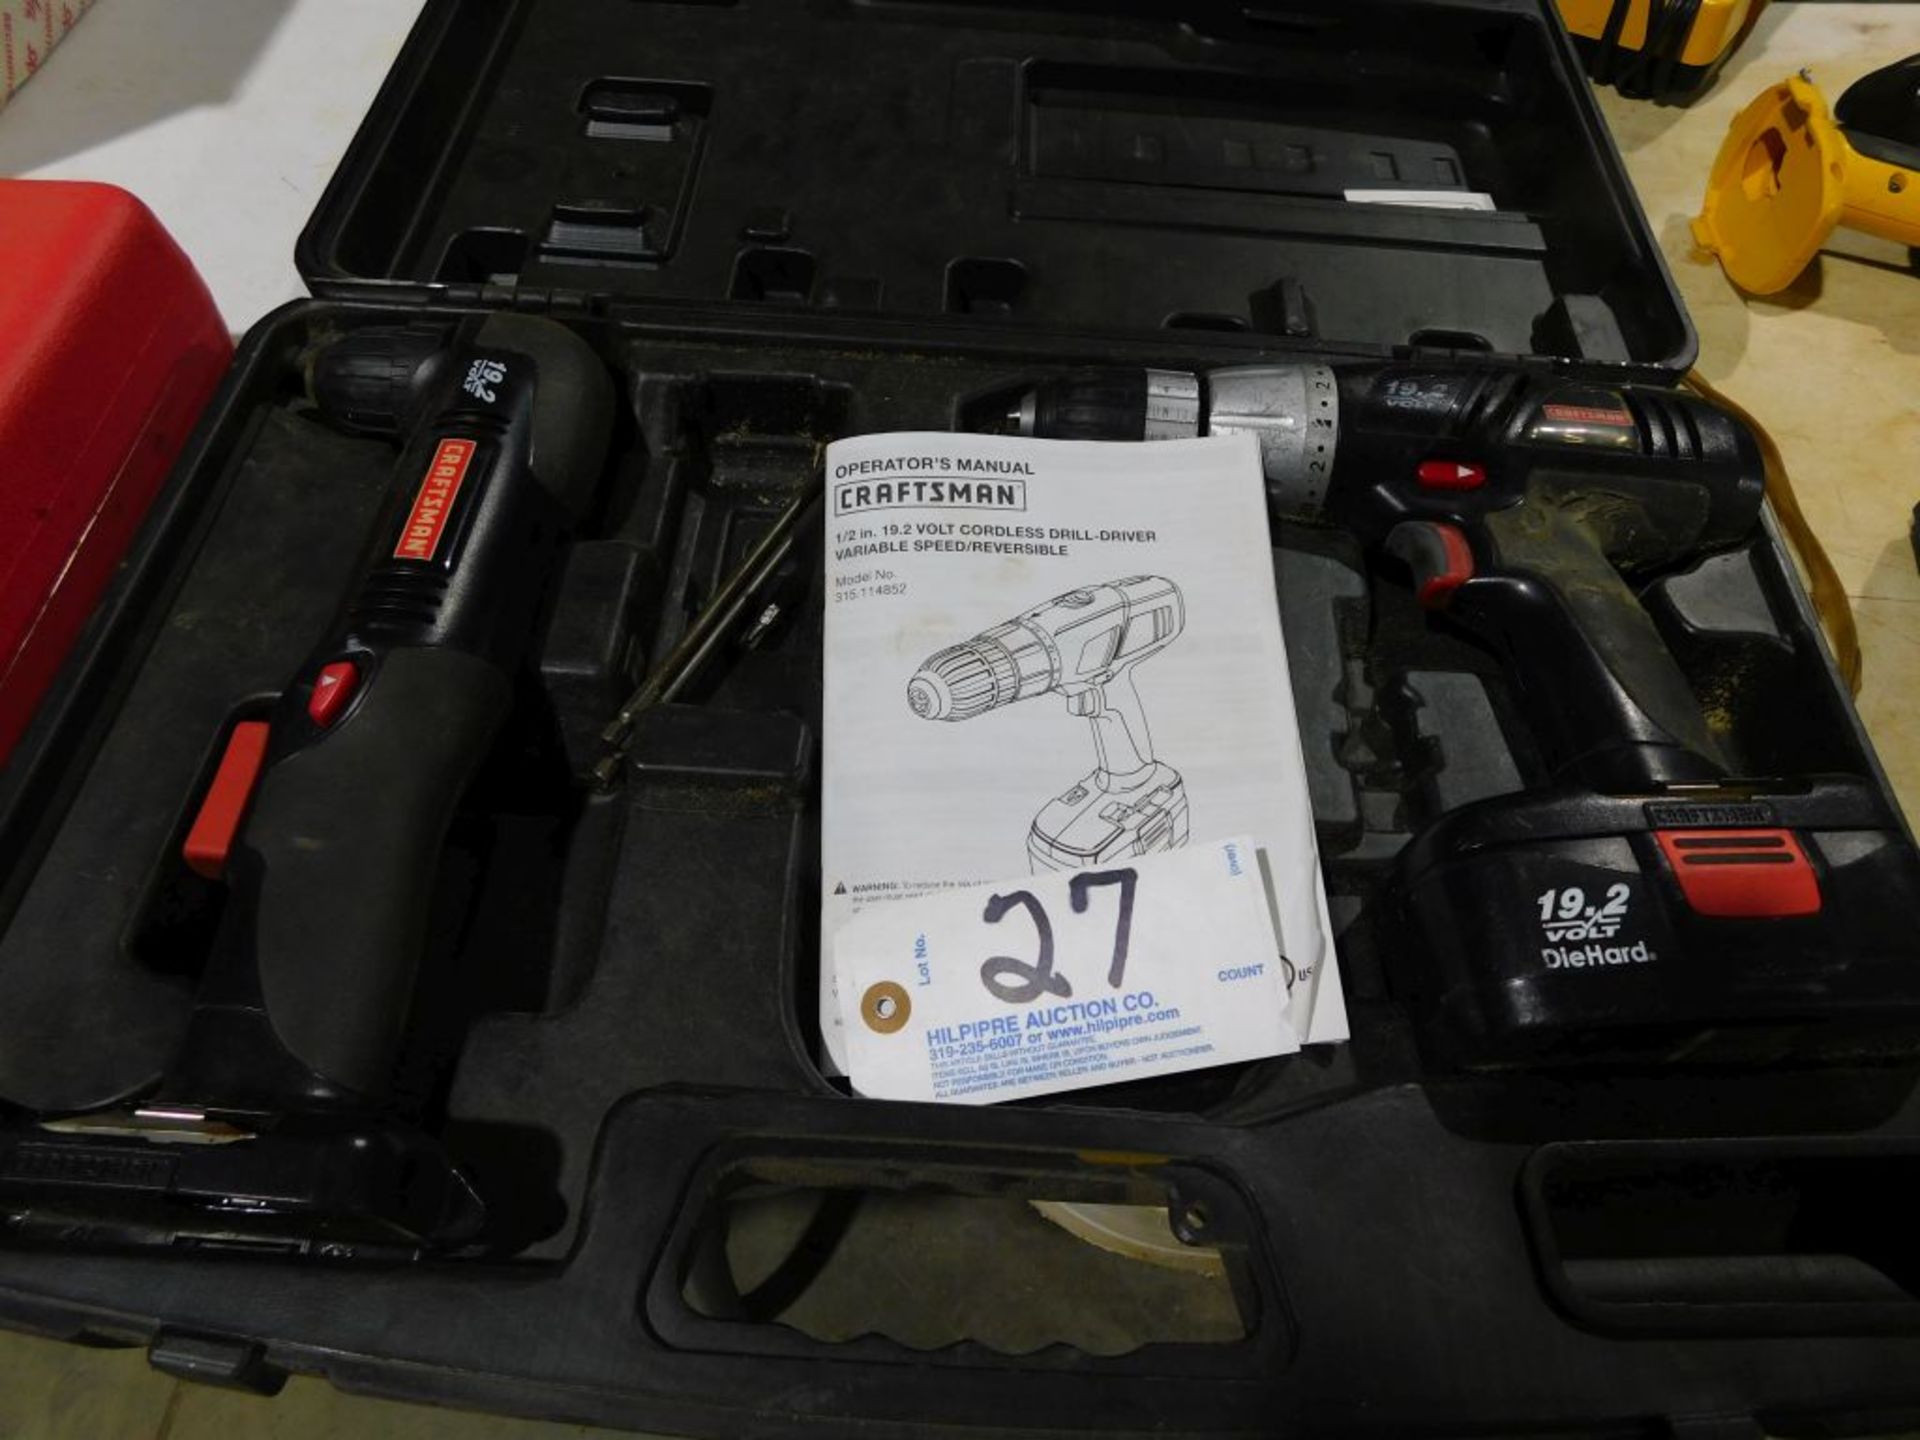 Craftsman drill/driver model 315.114852, cordless, 19 volt battery, no charger, 1/2". (Located at